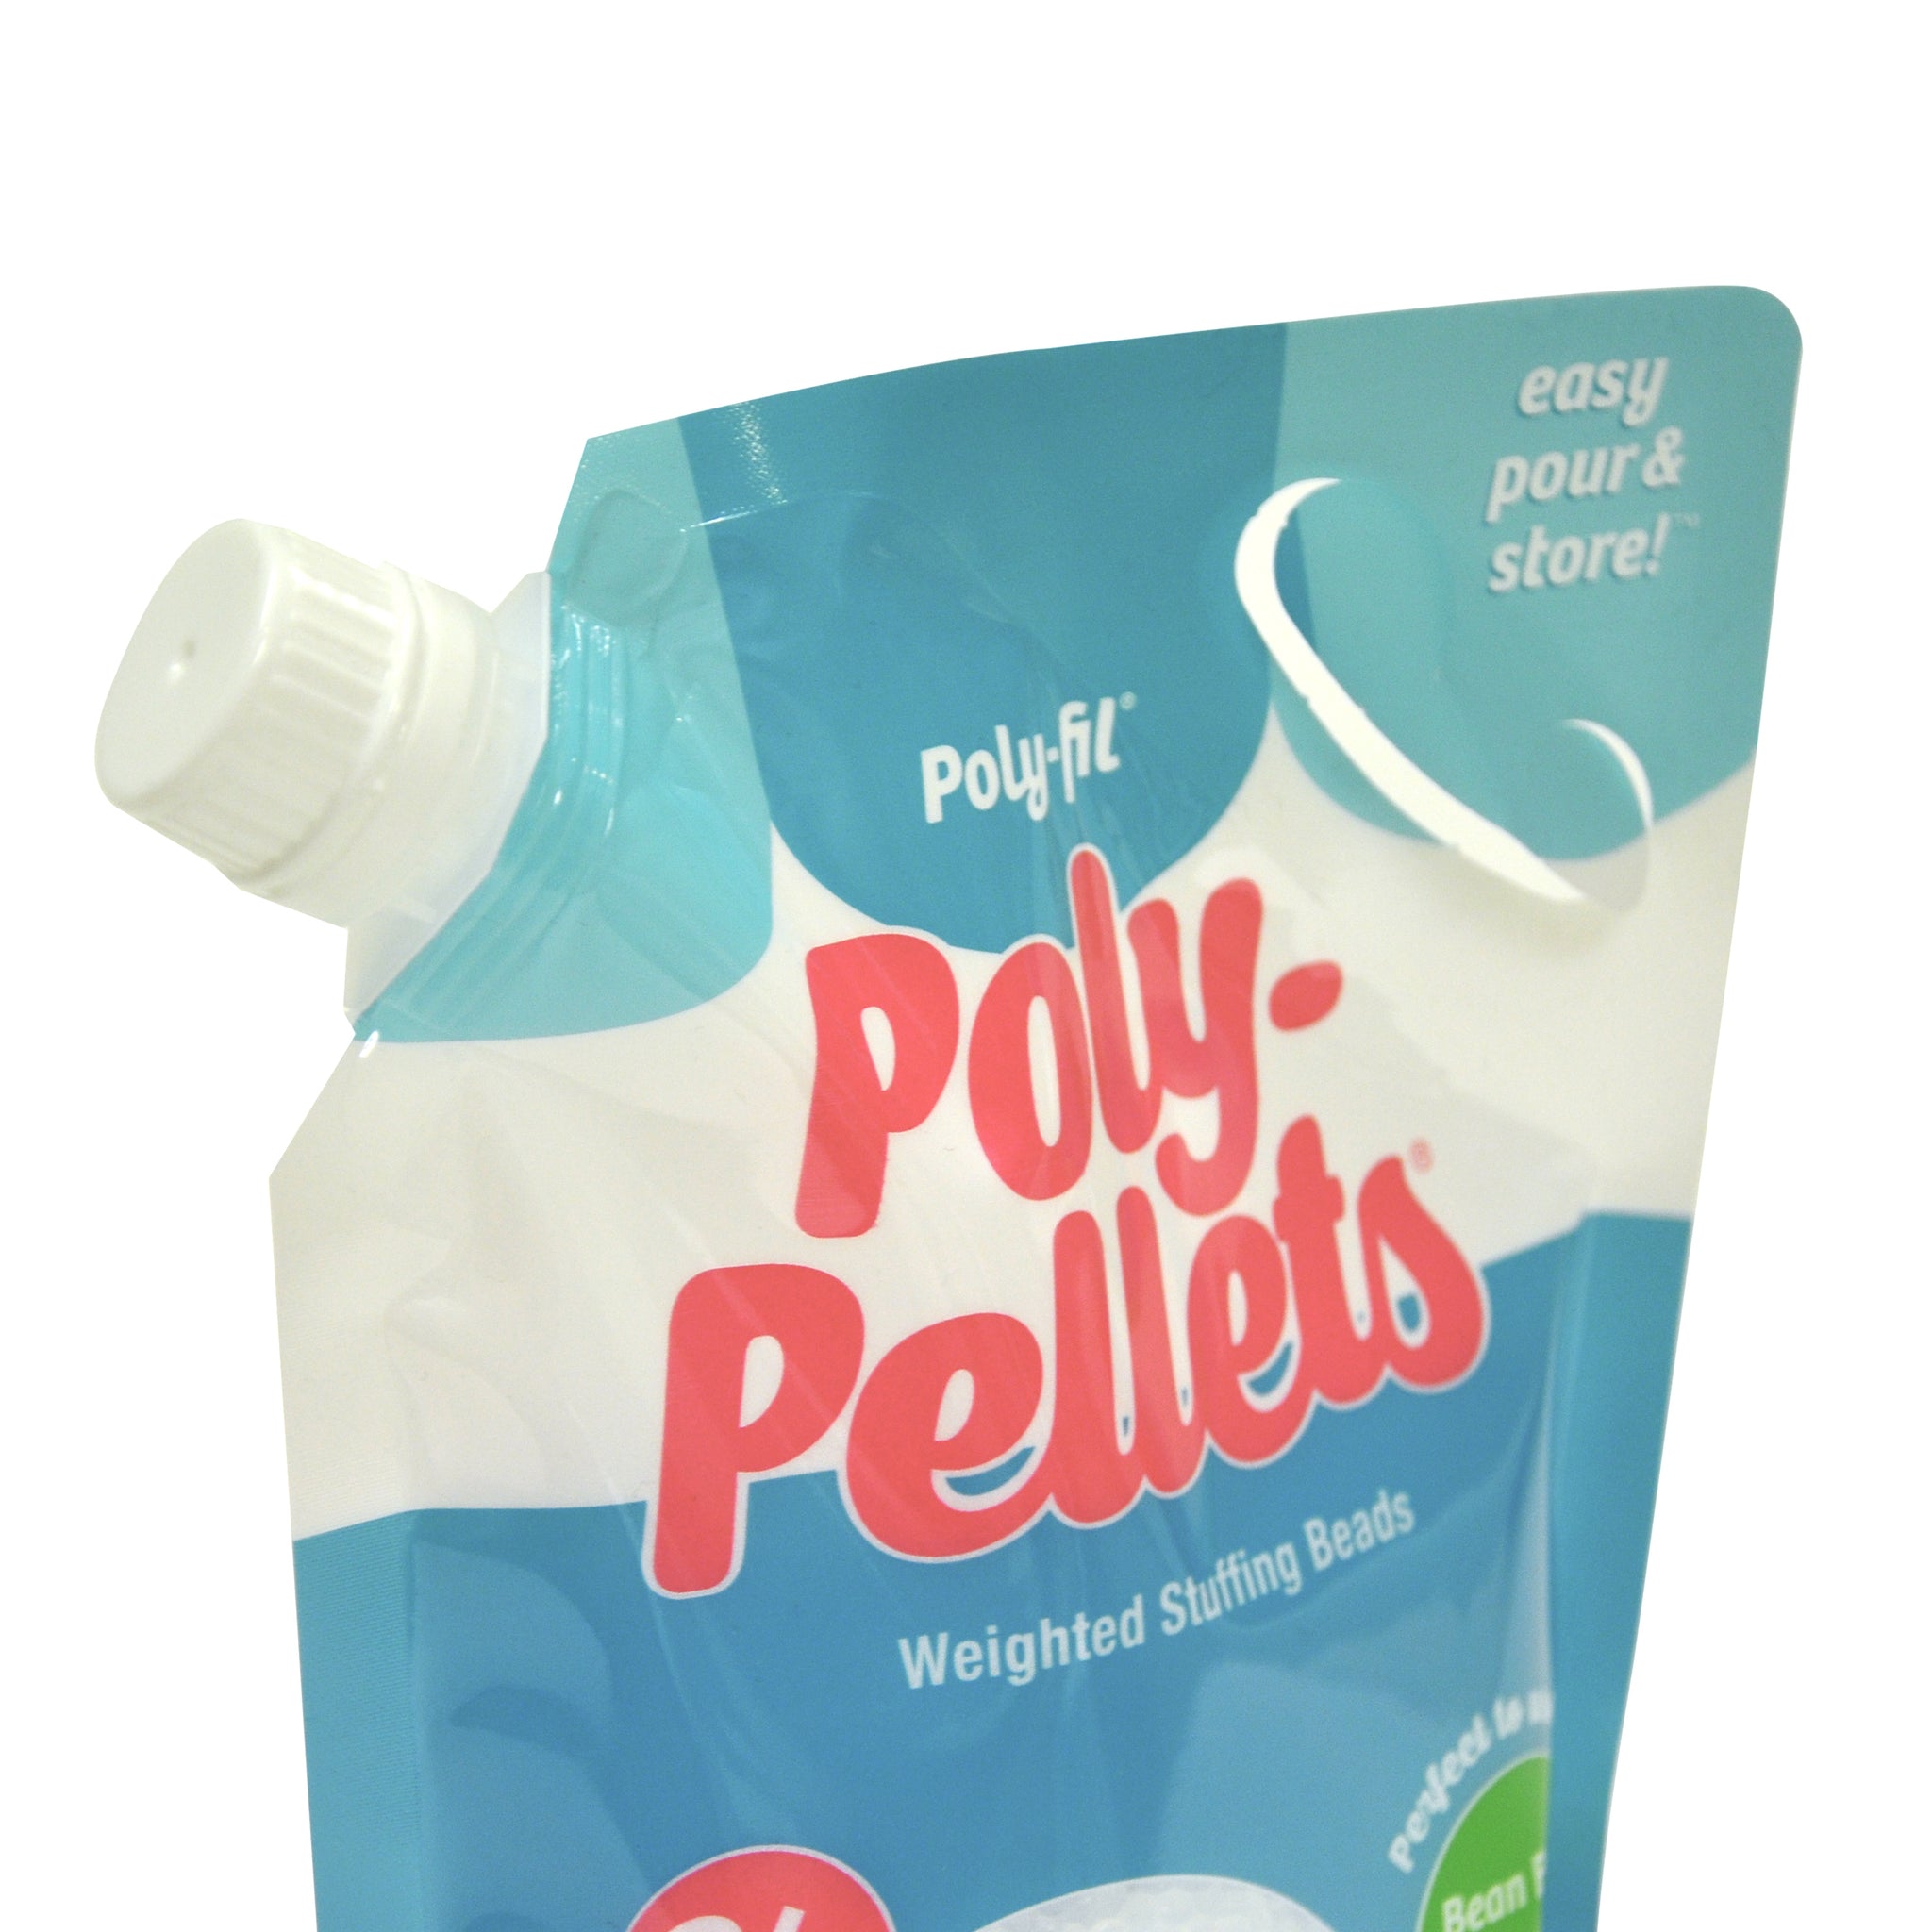 Poly-Pellets Beads 32 oz (Stuffing Beads) - 035352100368